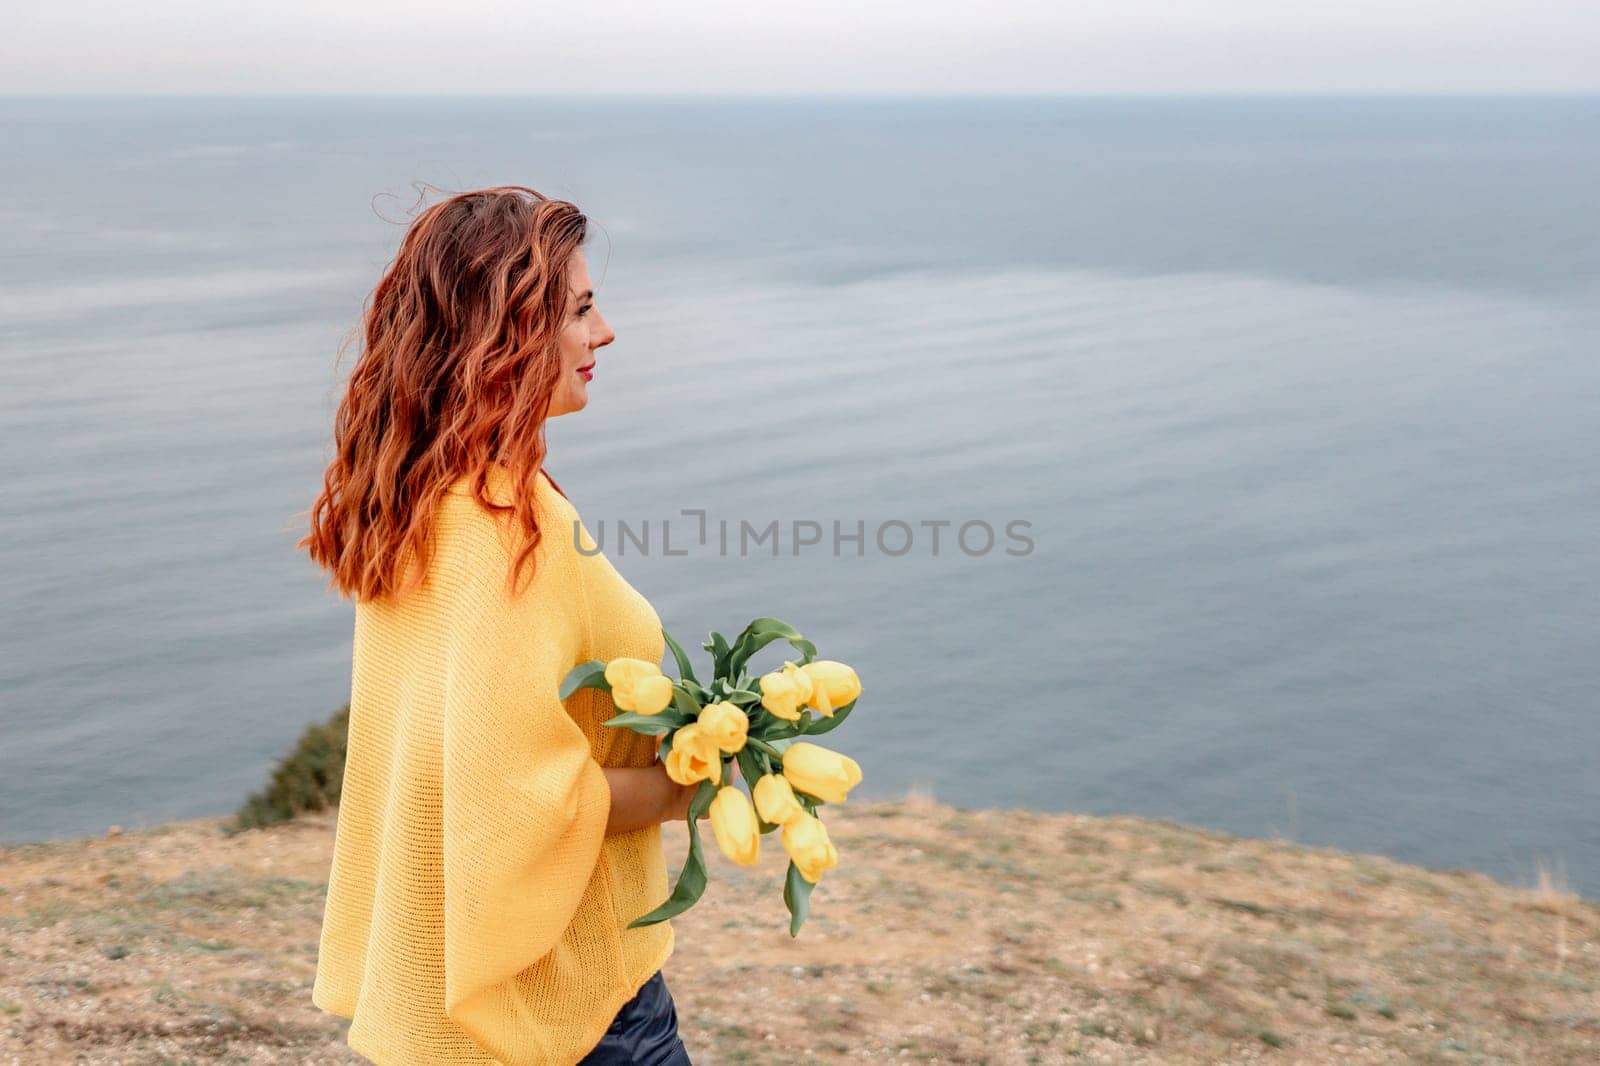 Rear view of a woman with long hair against a background of mountains and sea. Holding a bouquet of yellow tulips in her hands, wearing a yellow sweater.